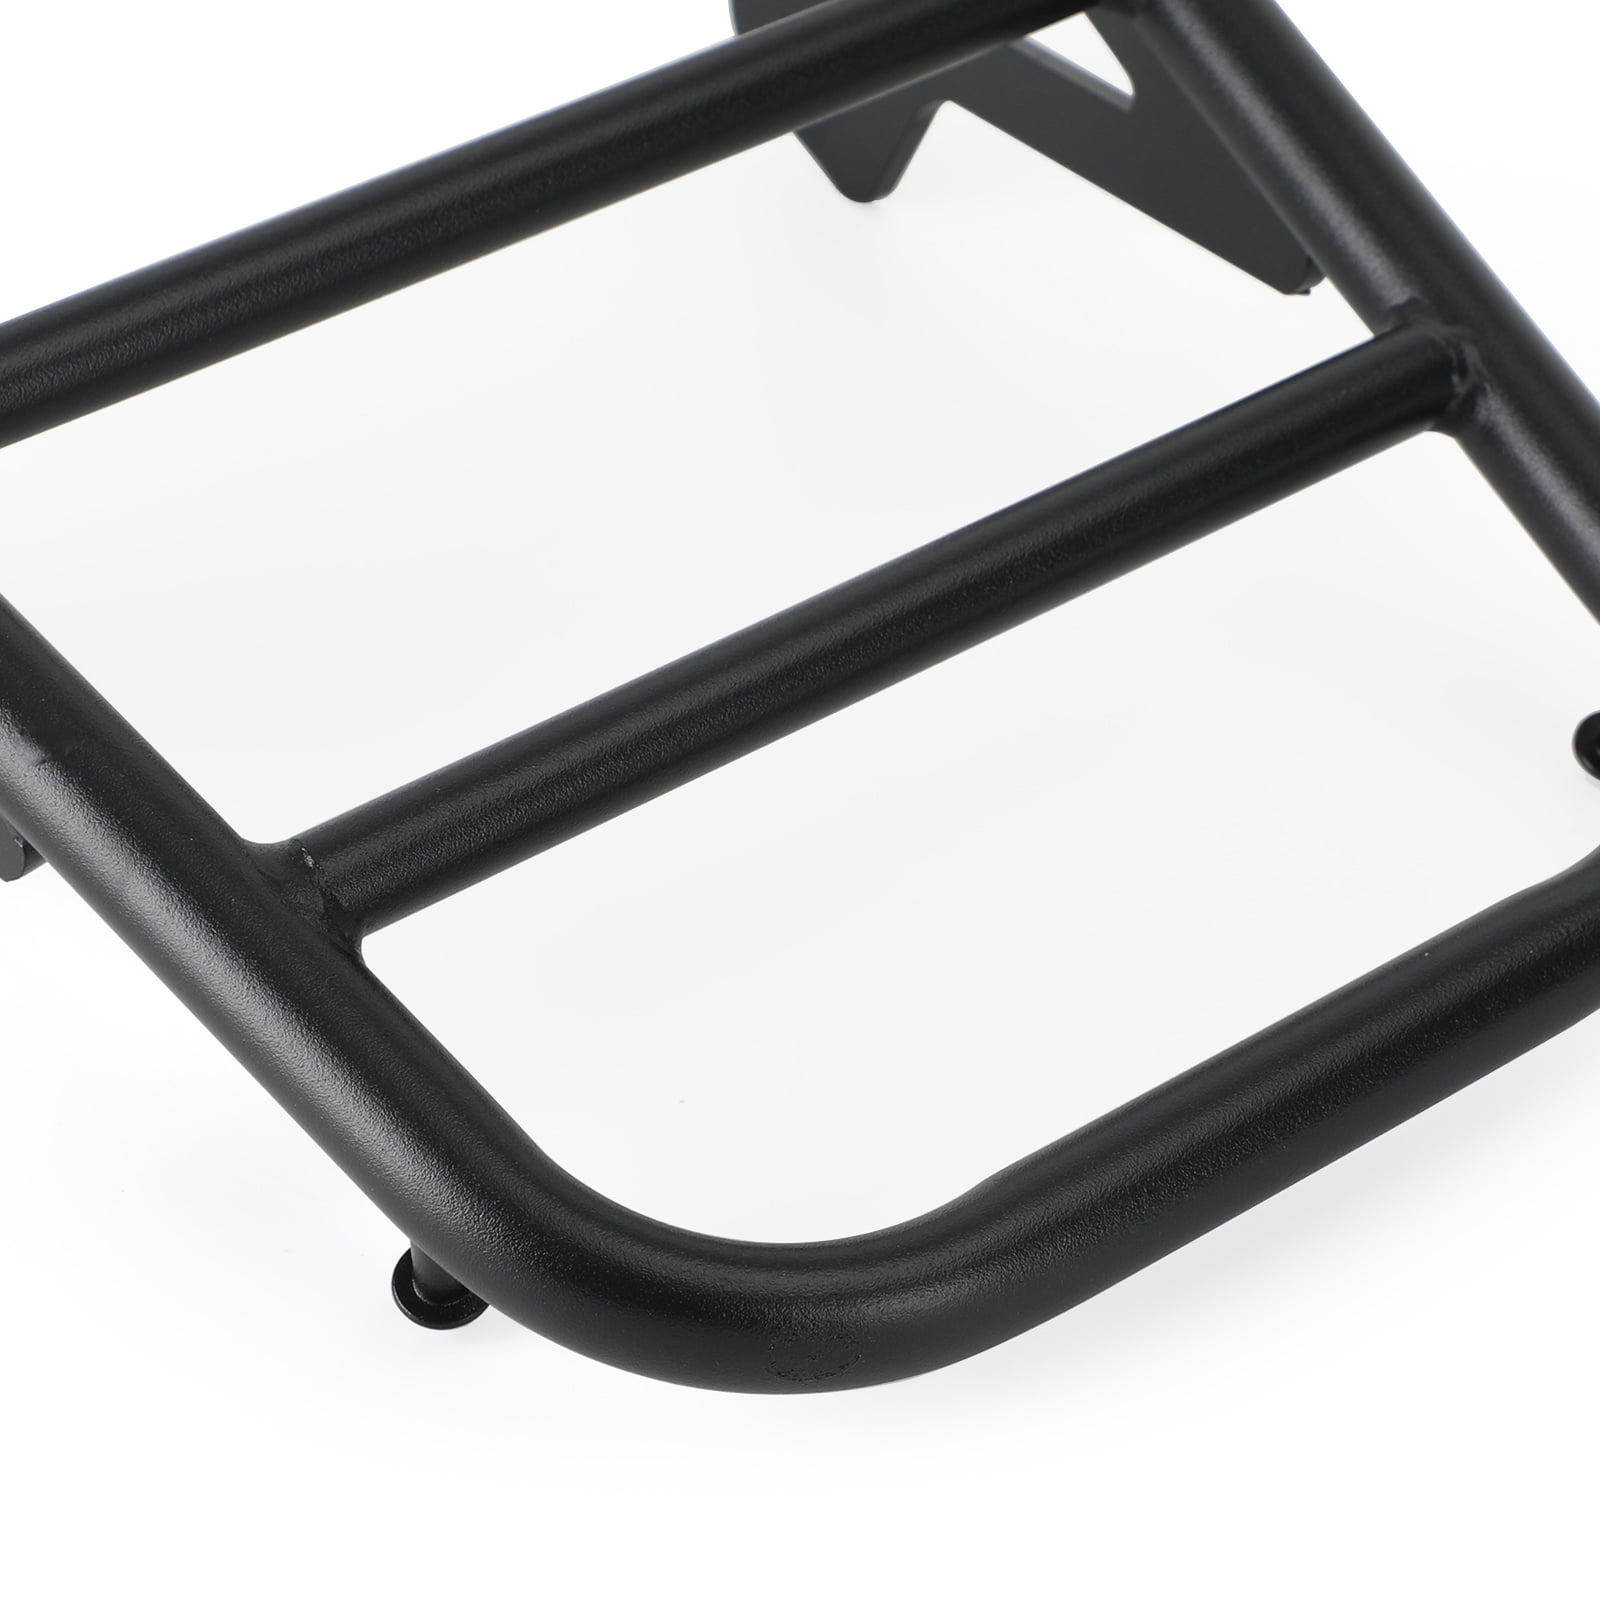  Kesoto Motorcycle Rear Luggage Rack,Tail Rack Support,Carrier  Shelf Iron Cargo Frame,for Yamaha Klx 230/R 2020-2022 Easy Install  Accessories : Automotive